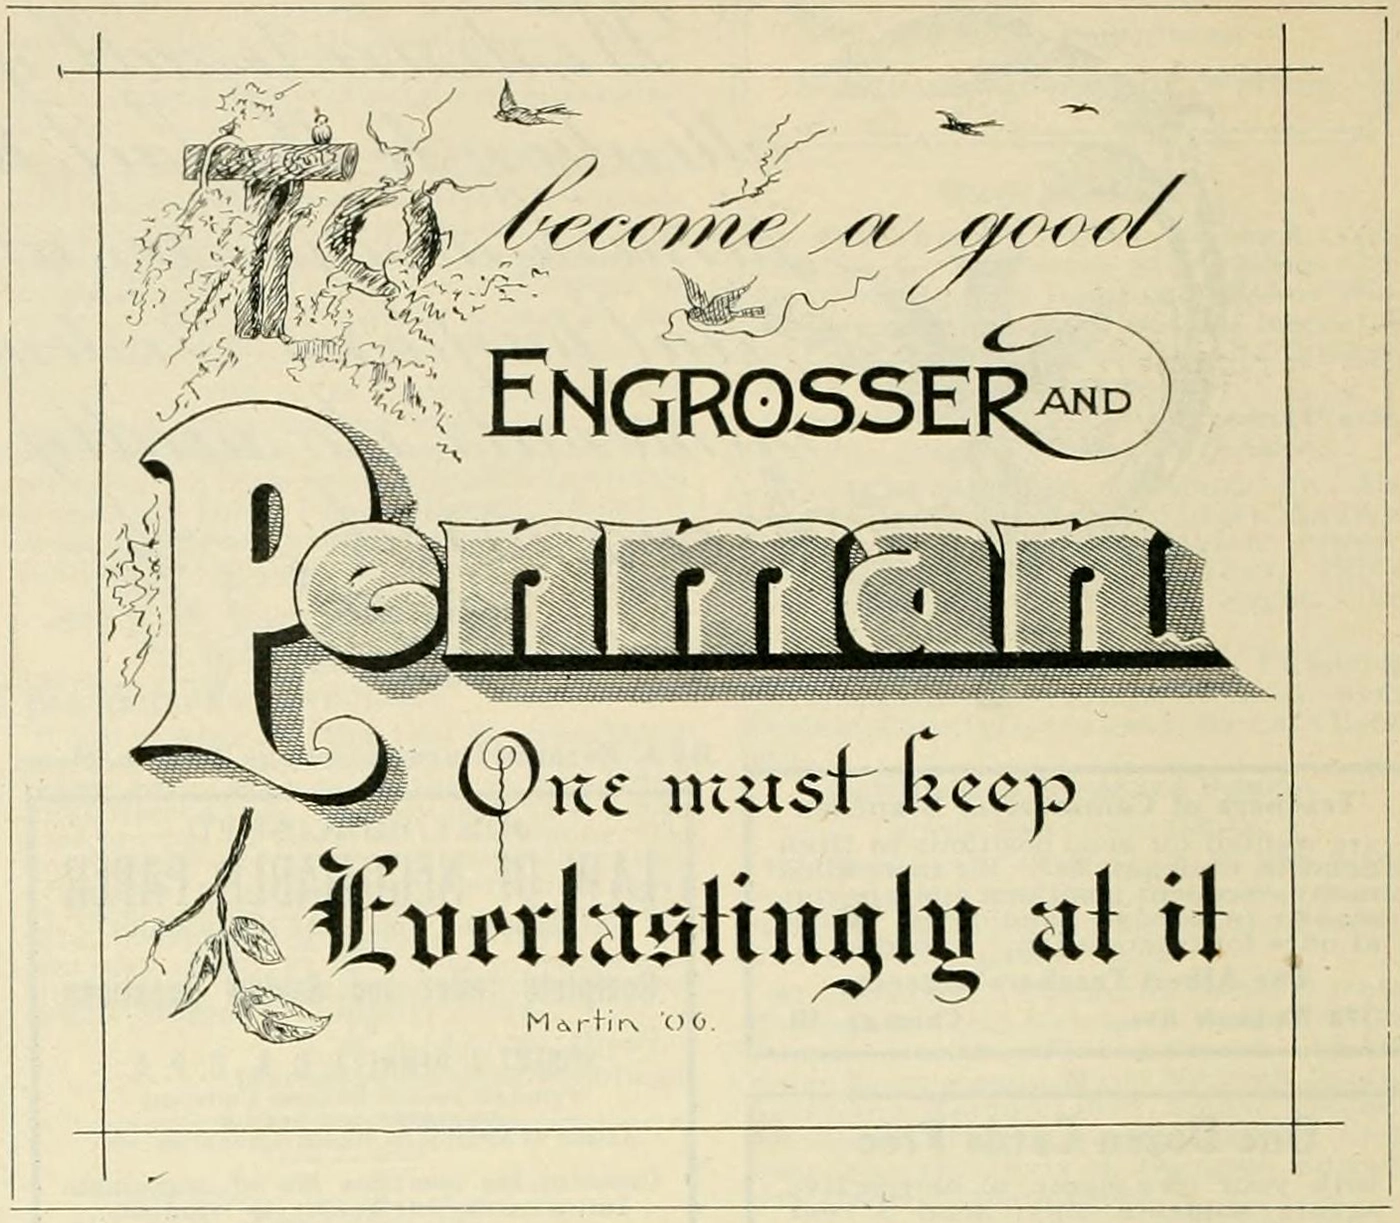 "To Become a Good Engrosser and Penman" Lettering Sample from The Business Educator, 1907.